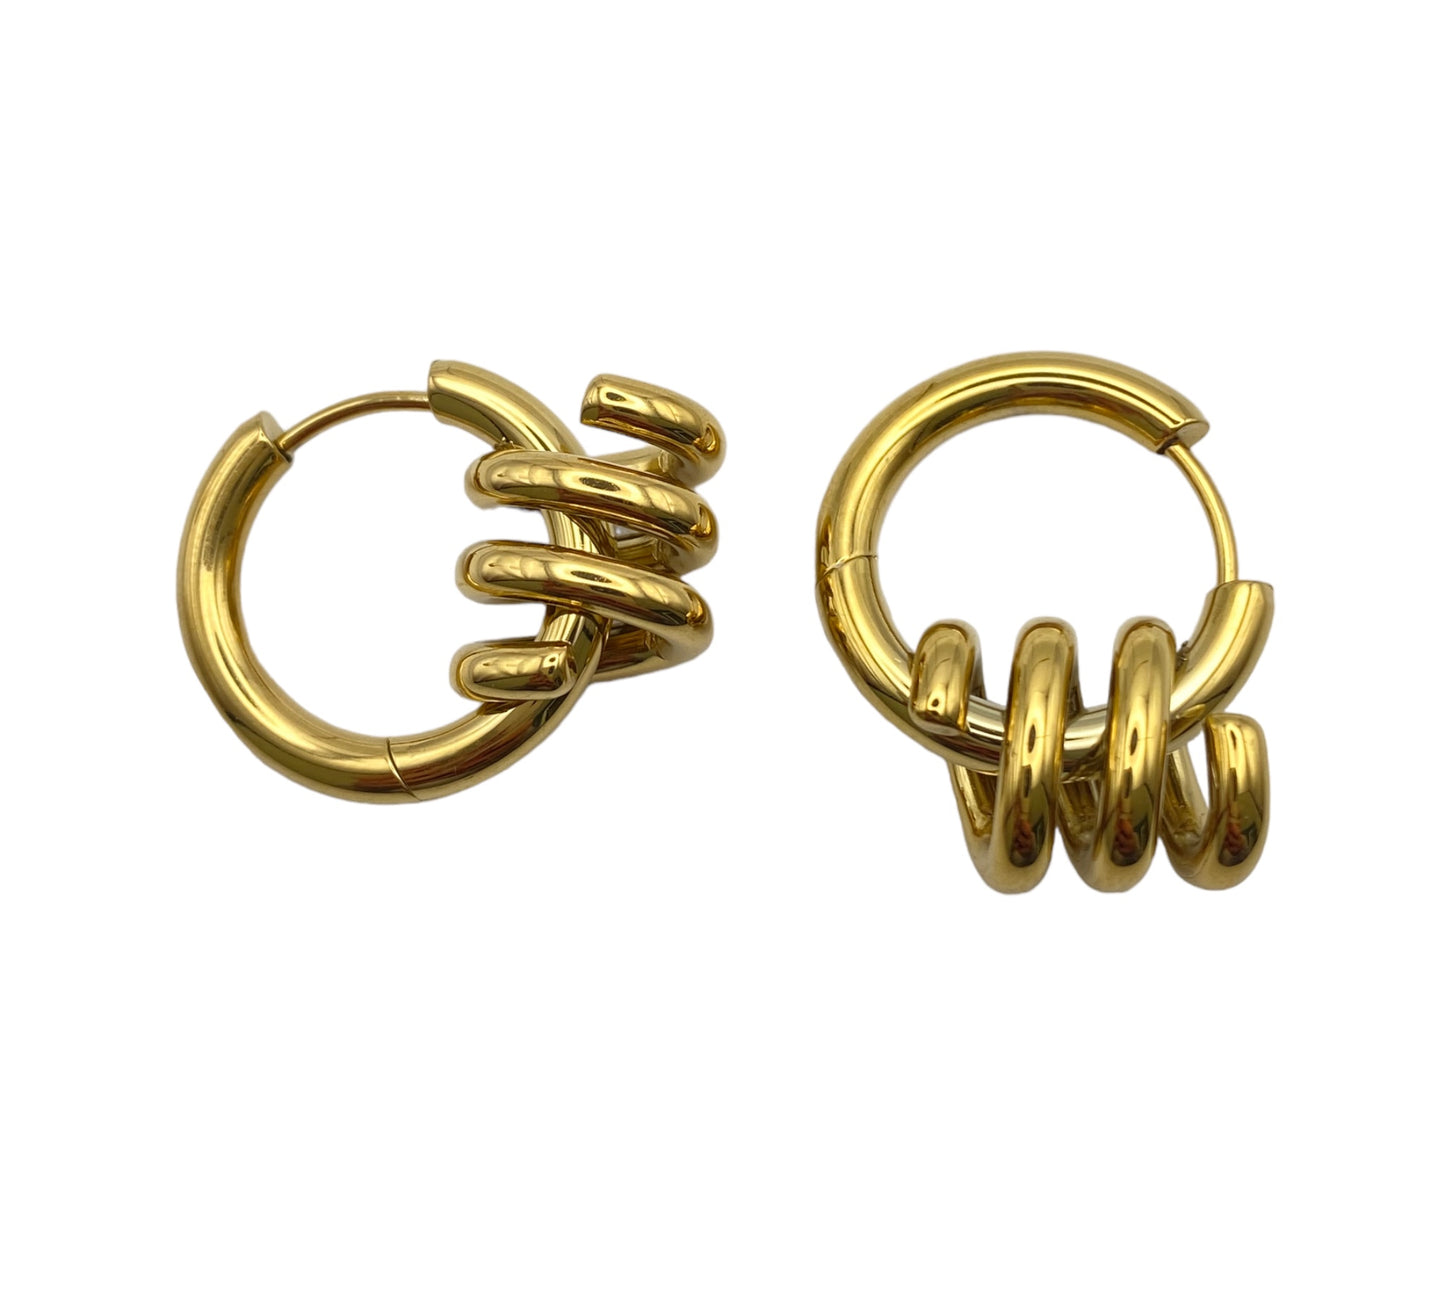 "WIRED" gold plated hoop earrings with a fixed side charm